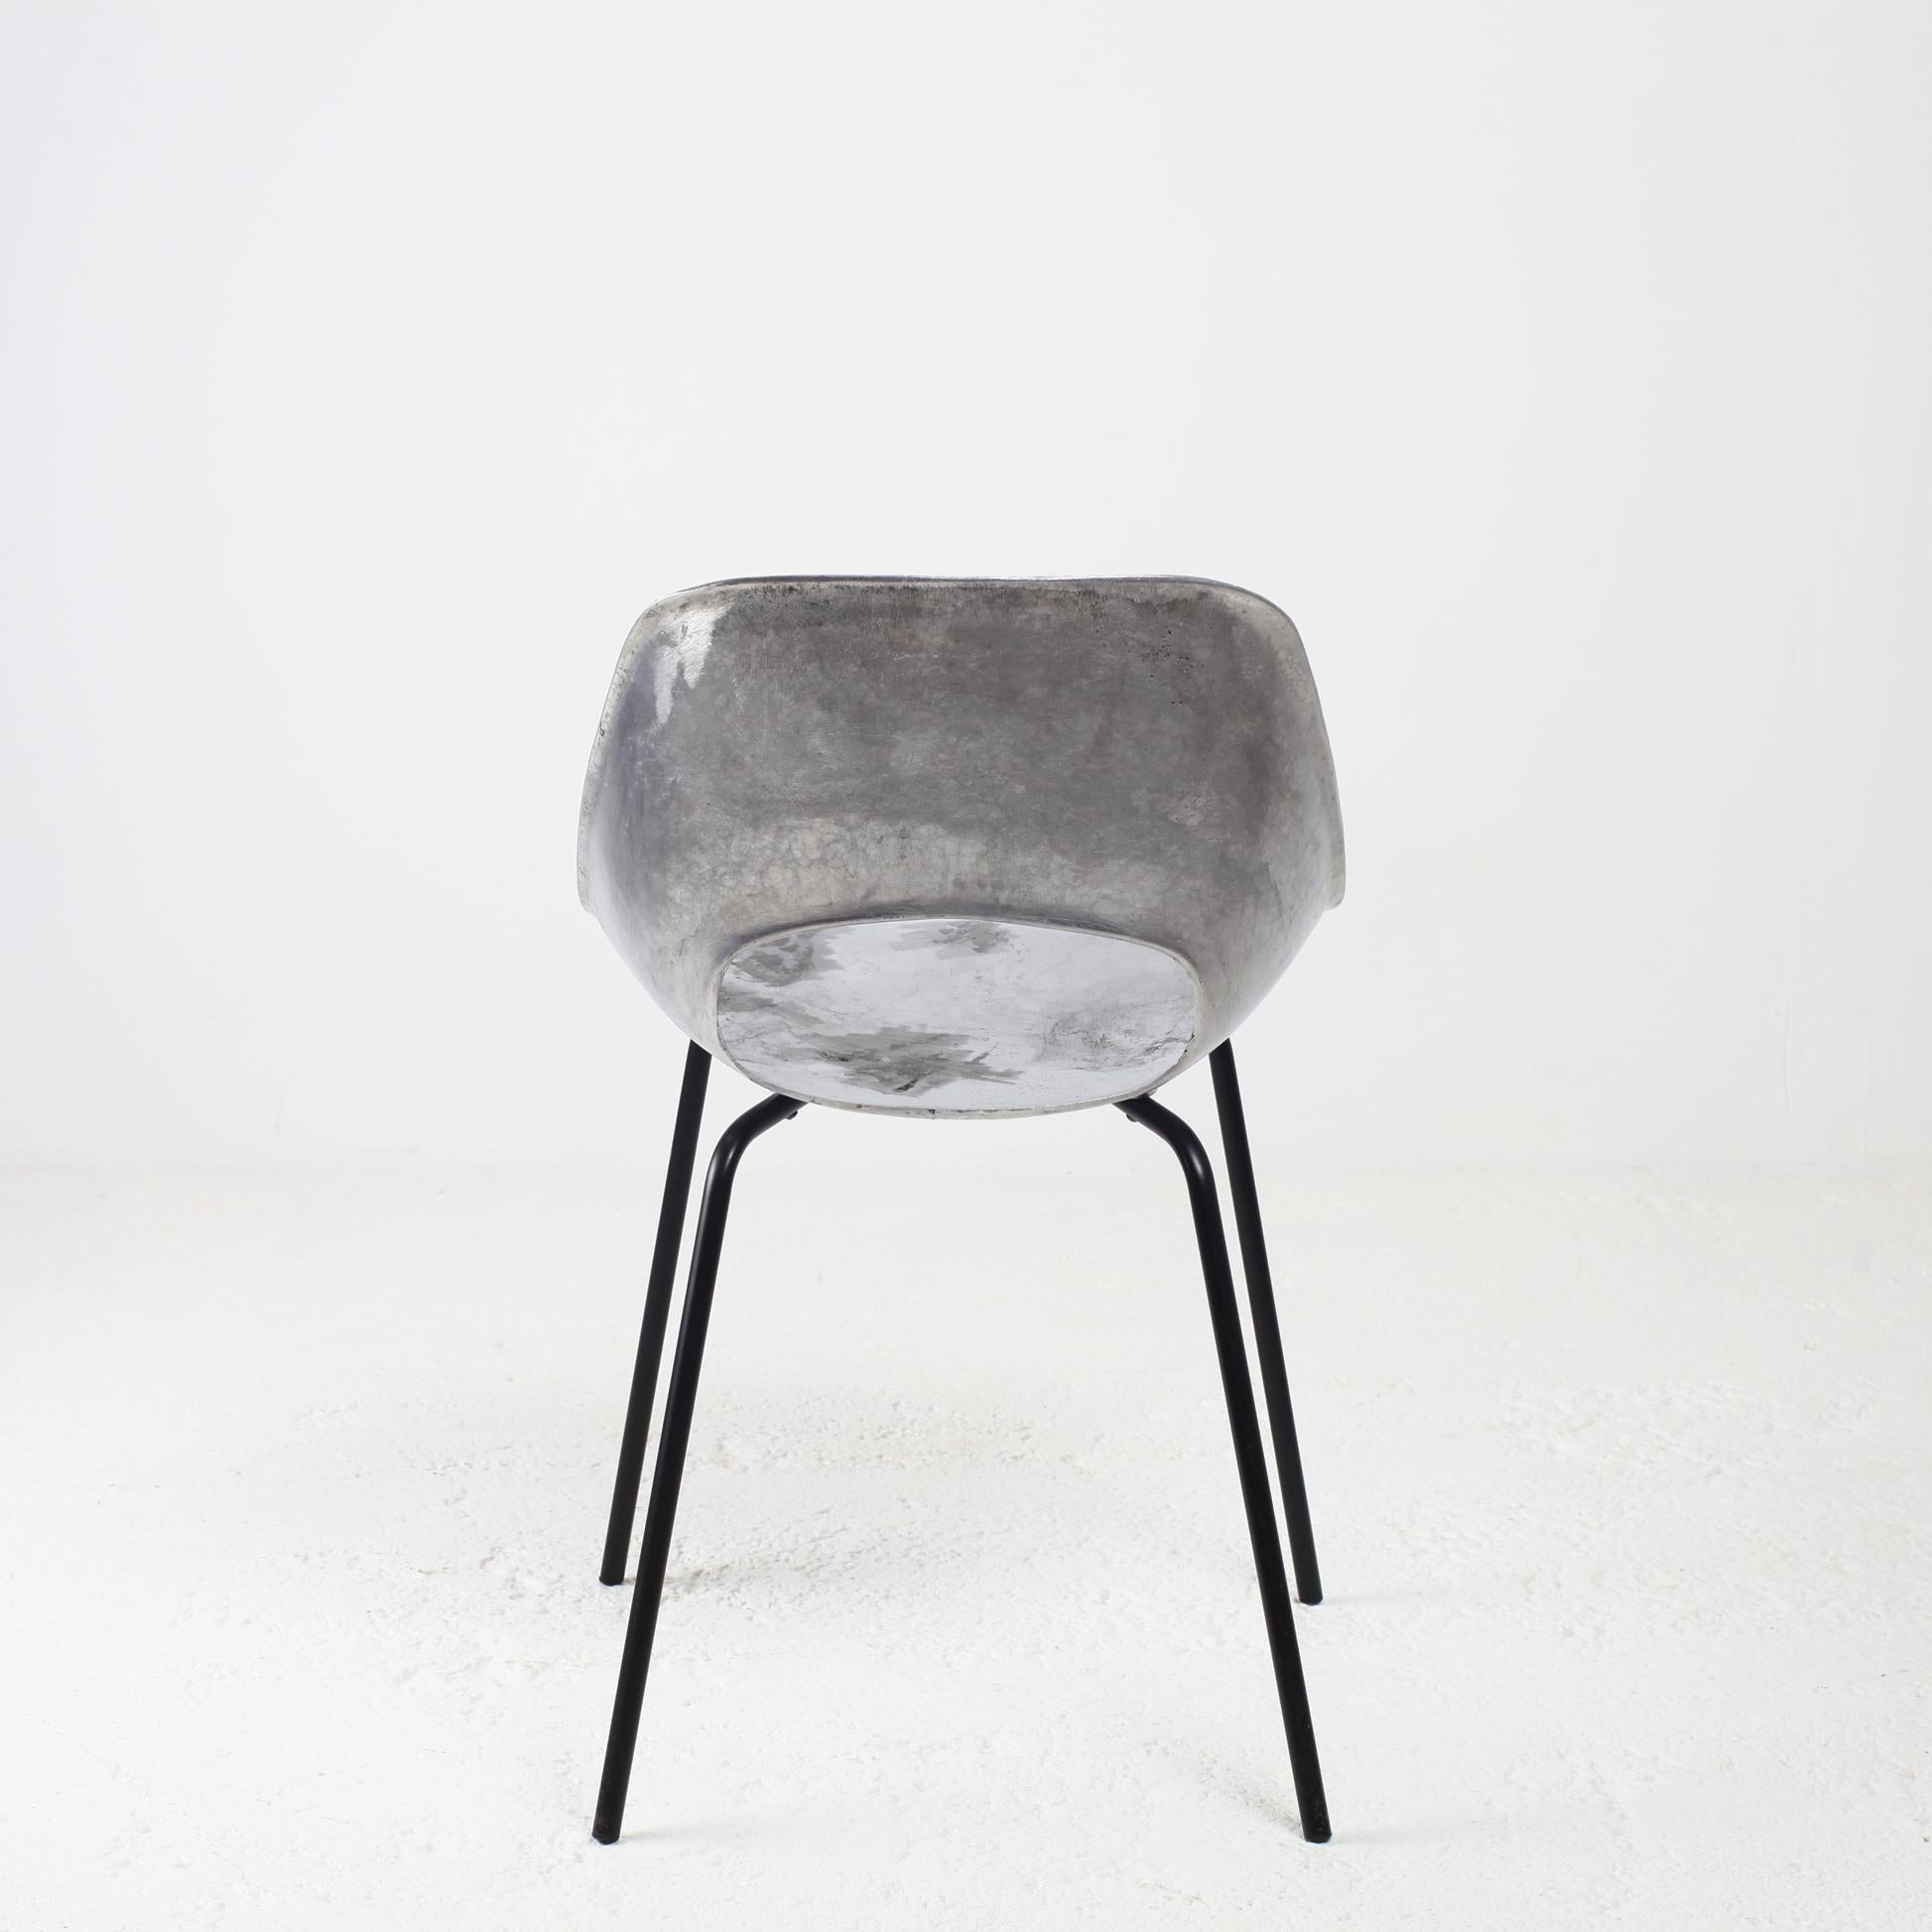 Cast Early Pierre Guariche Aluminium Tulip Chair For Steiner, France, 1950